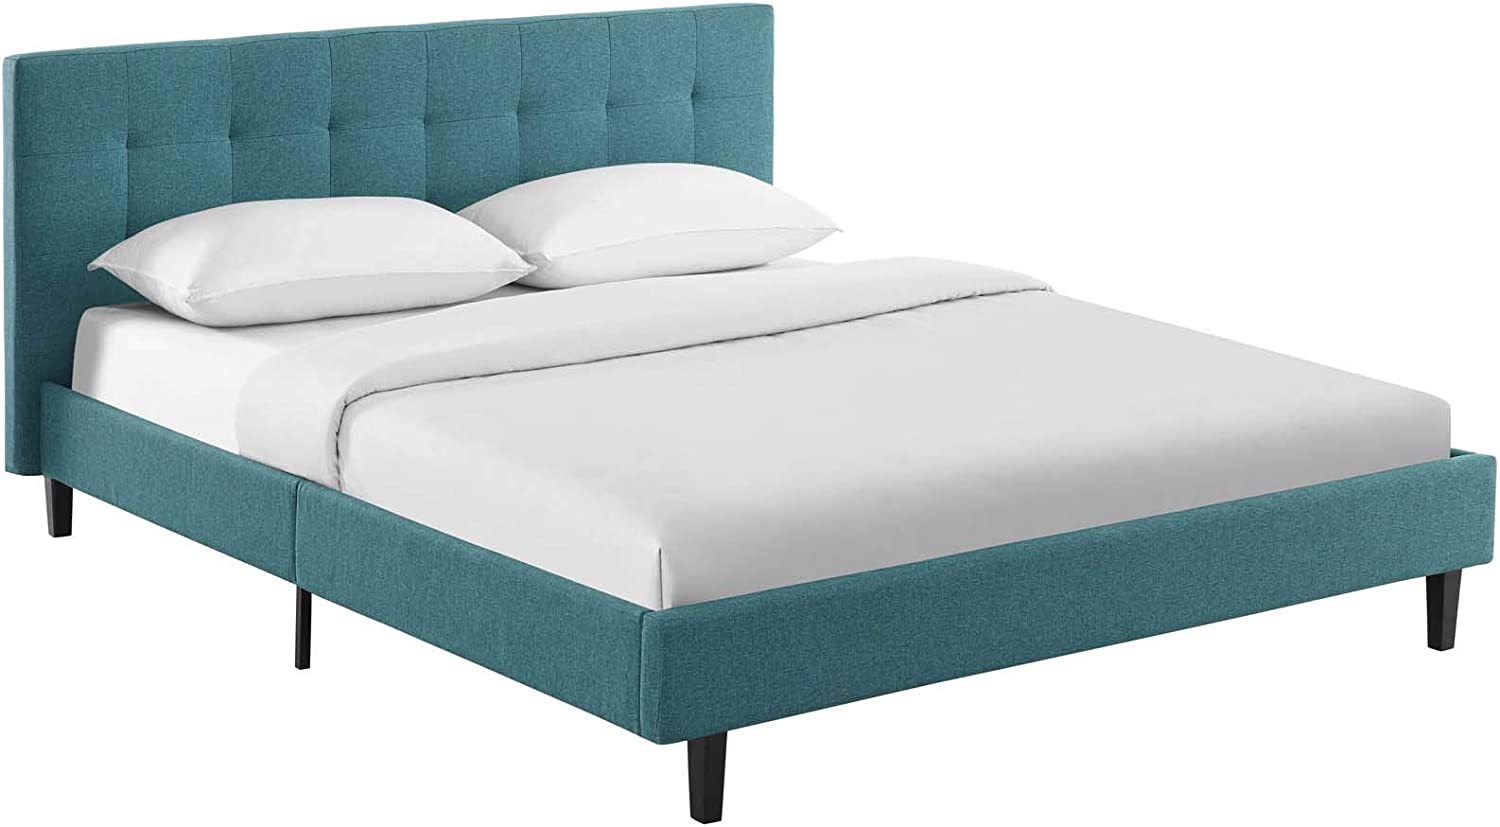 Primary image for Queen Platform Bed In Teal With Wood Slat Support By Modway.